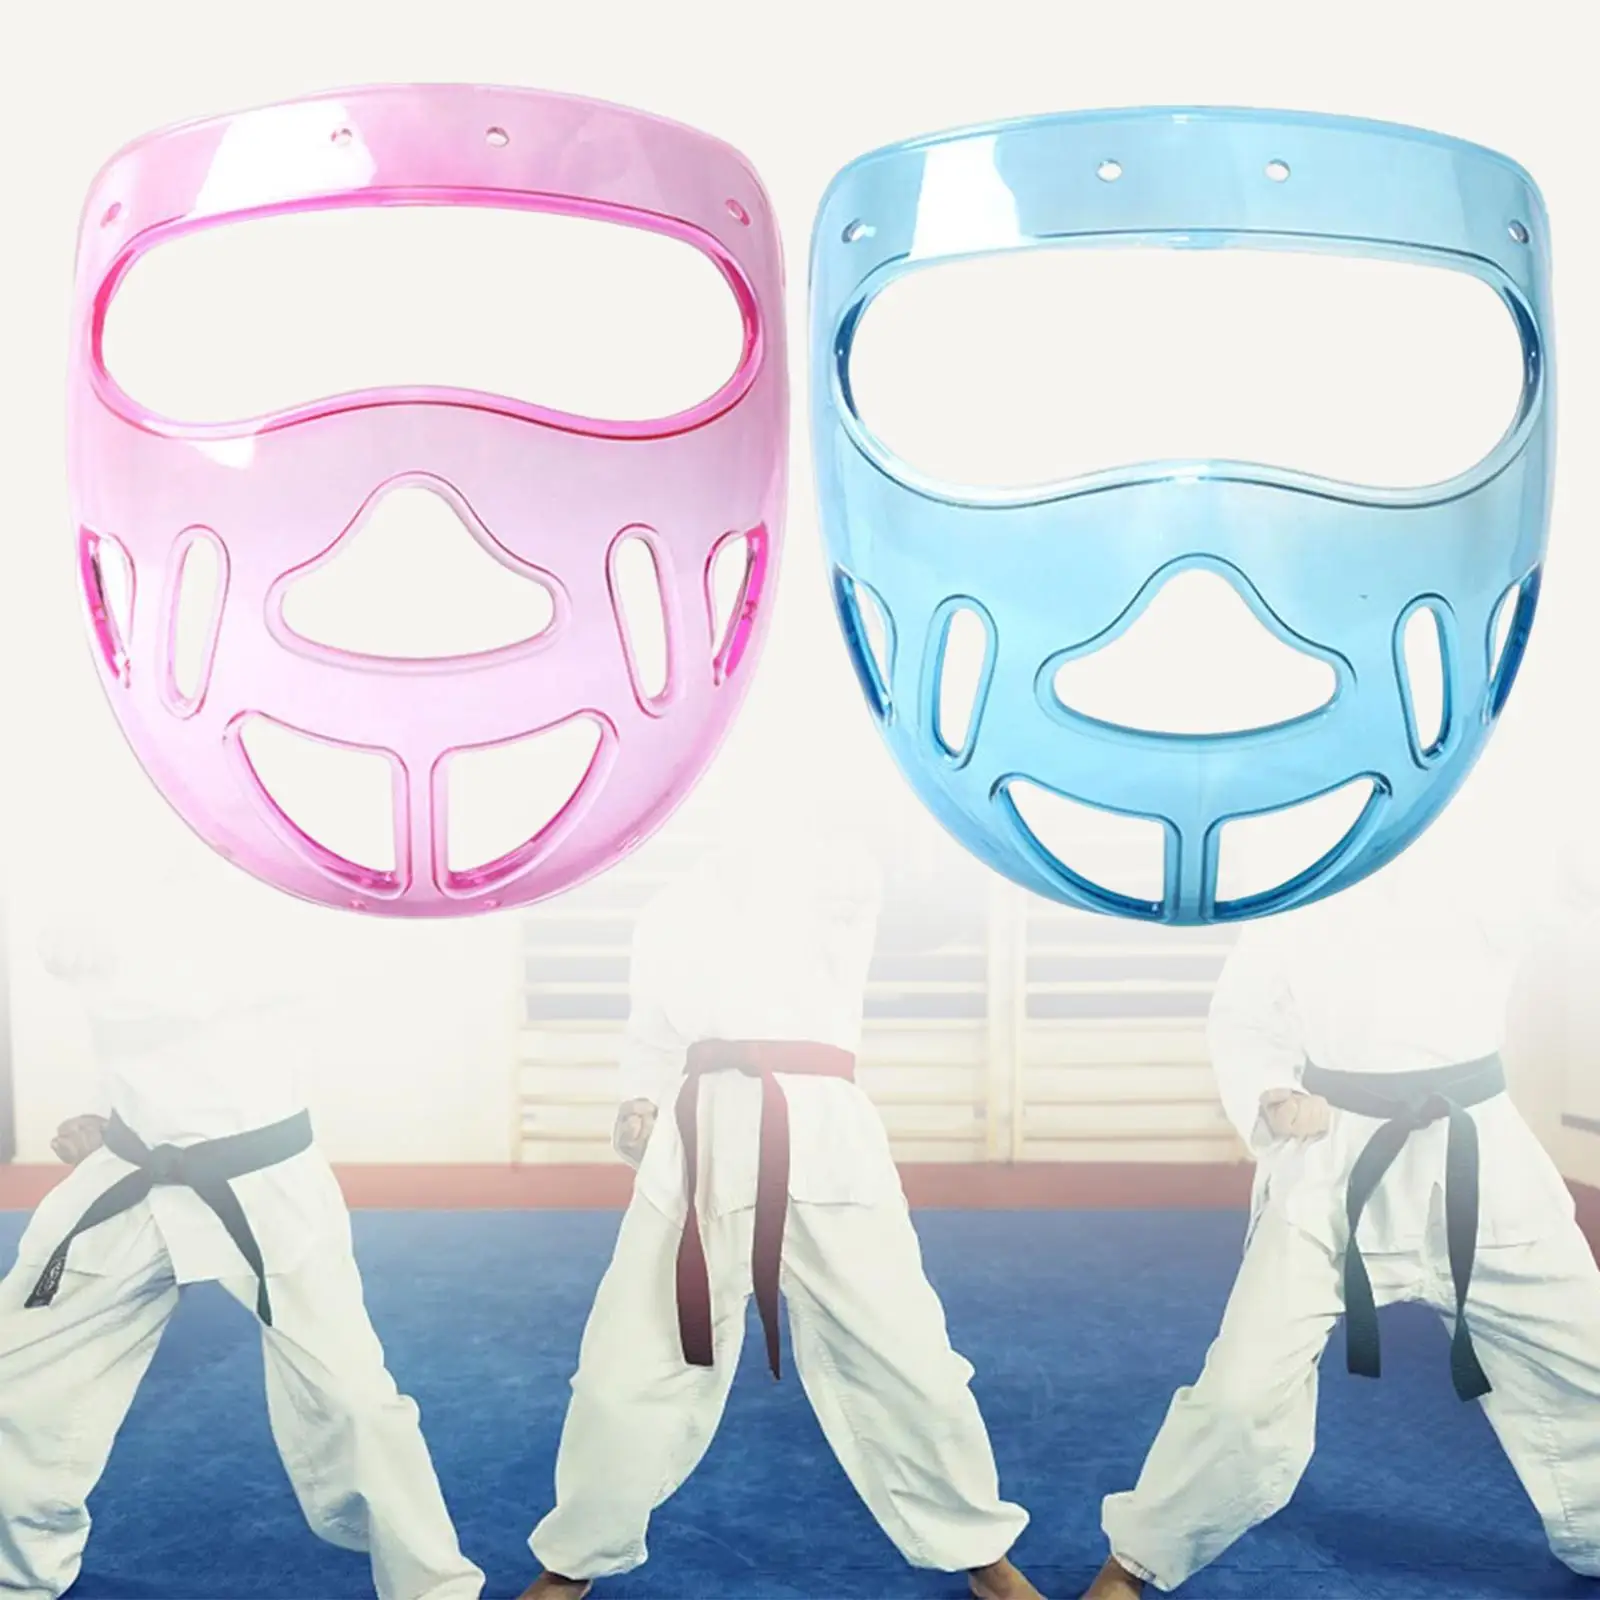 Clear Taekwondo Faceguard Face Protective Removable Face Protection Cover for Martial Arts Boxing Sanda Sparring Adults